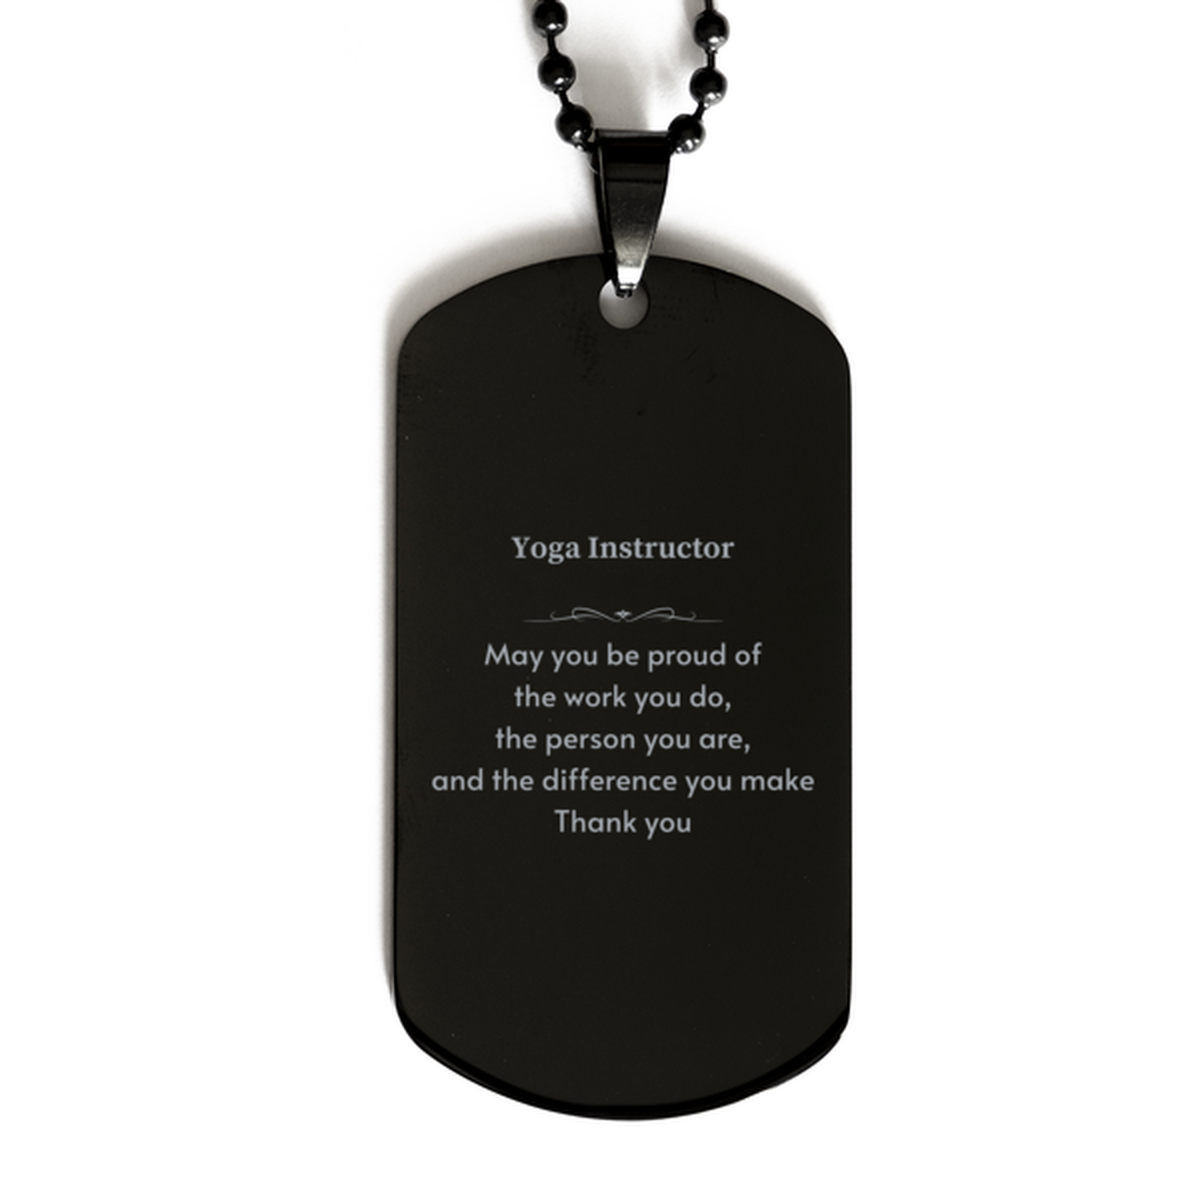 Heartwarming Black Dog Tag Retirement Coworkers Gifts for Yoga Instructor, Yoga Instructor May You be proud of the work you do, the person you are Gifts for Boss Men Women Friends